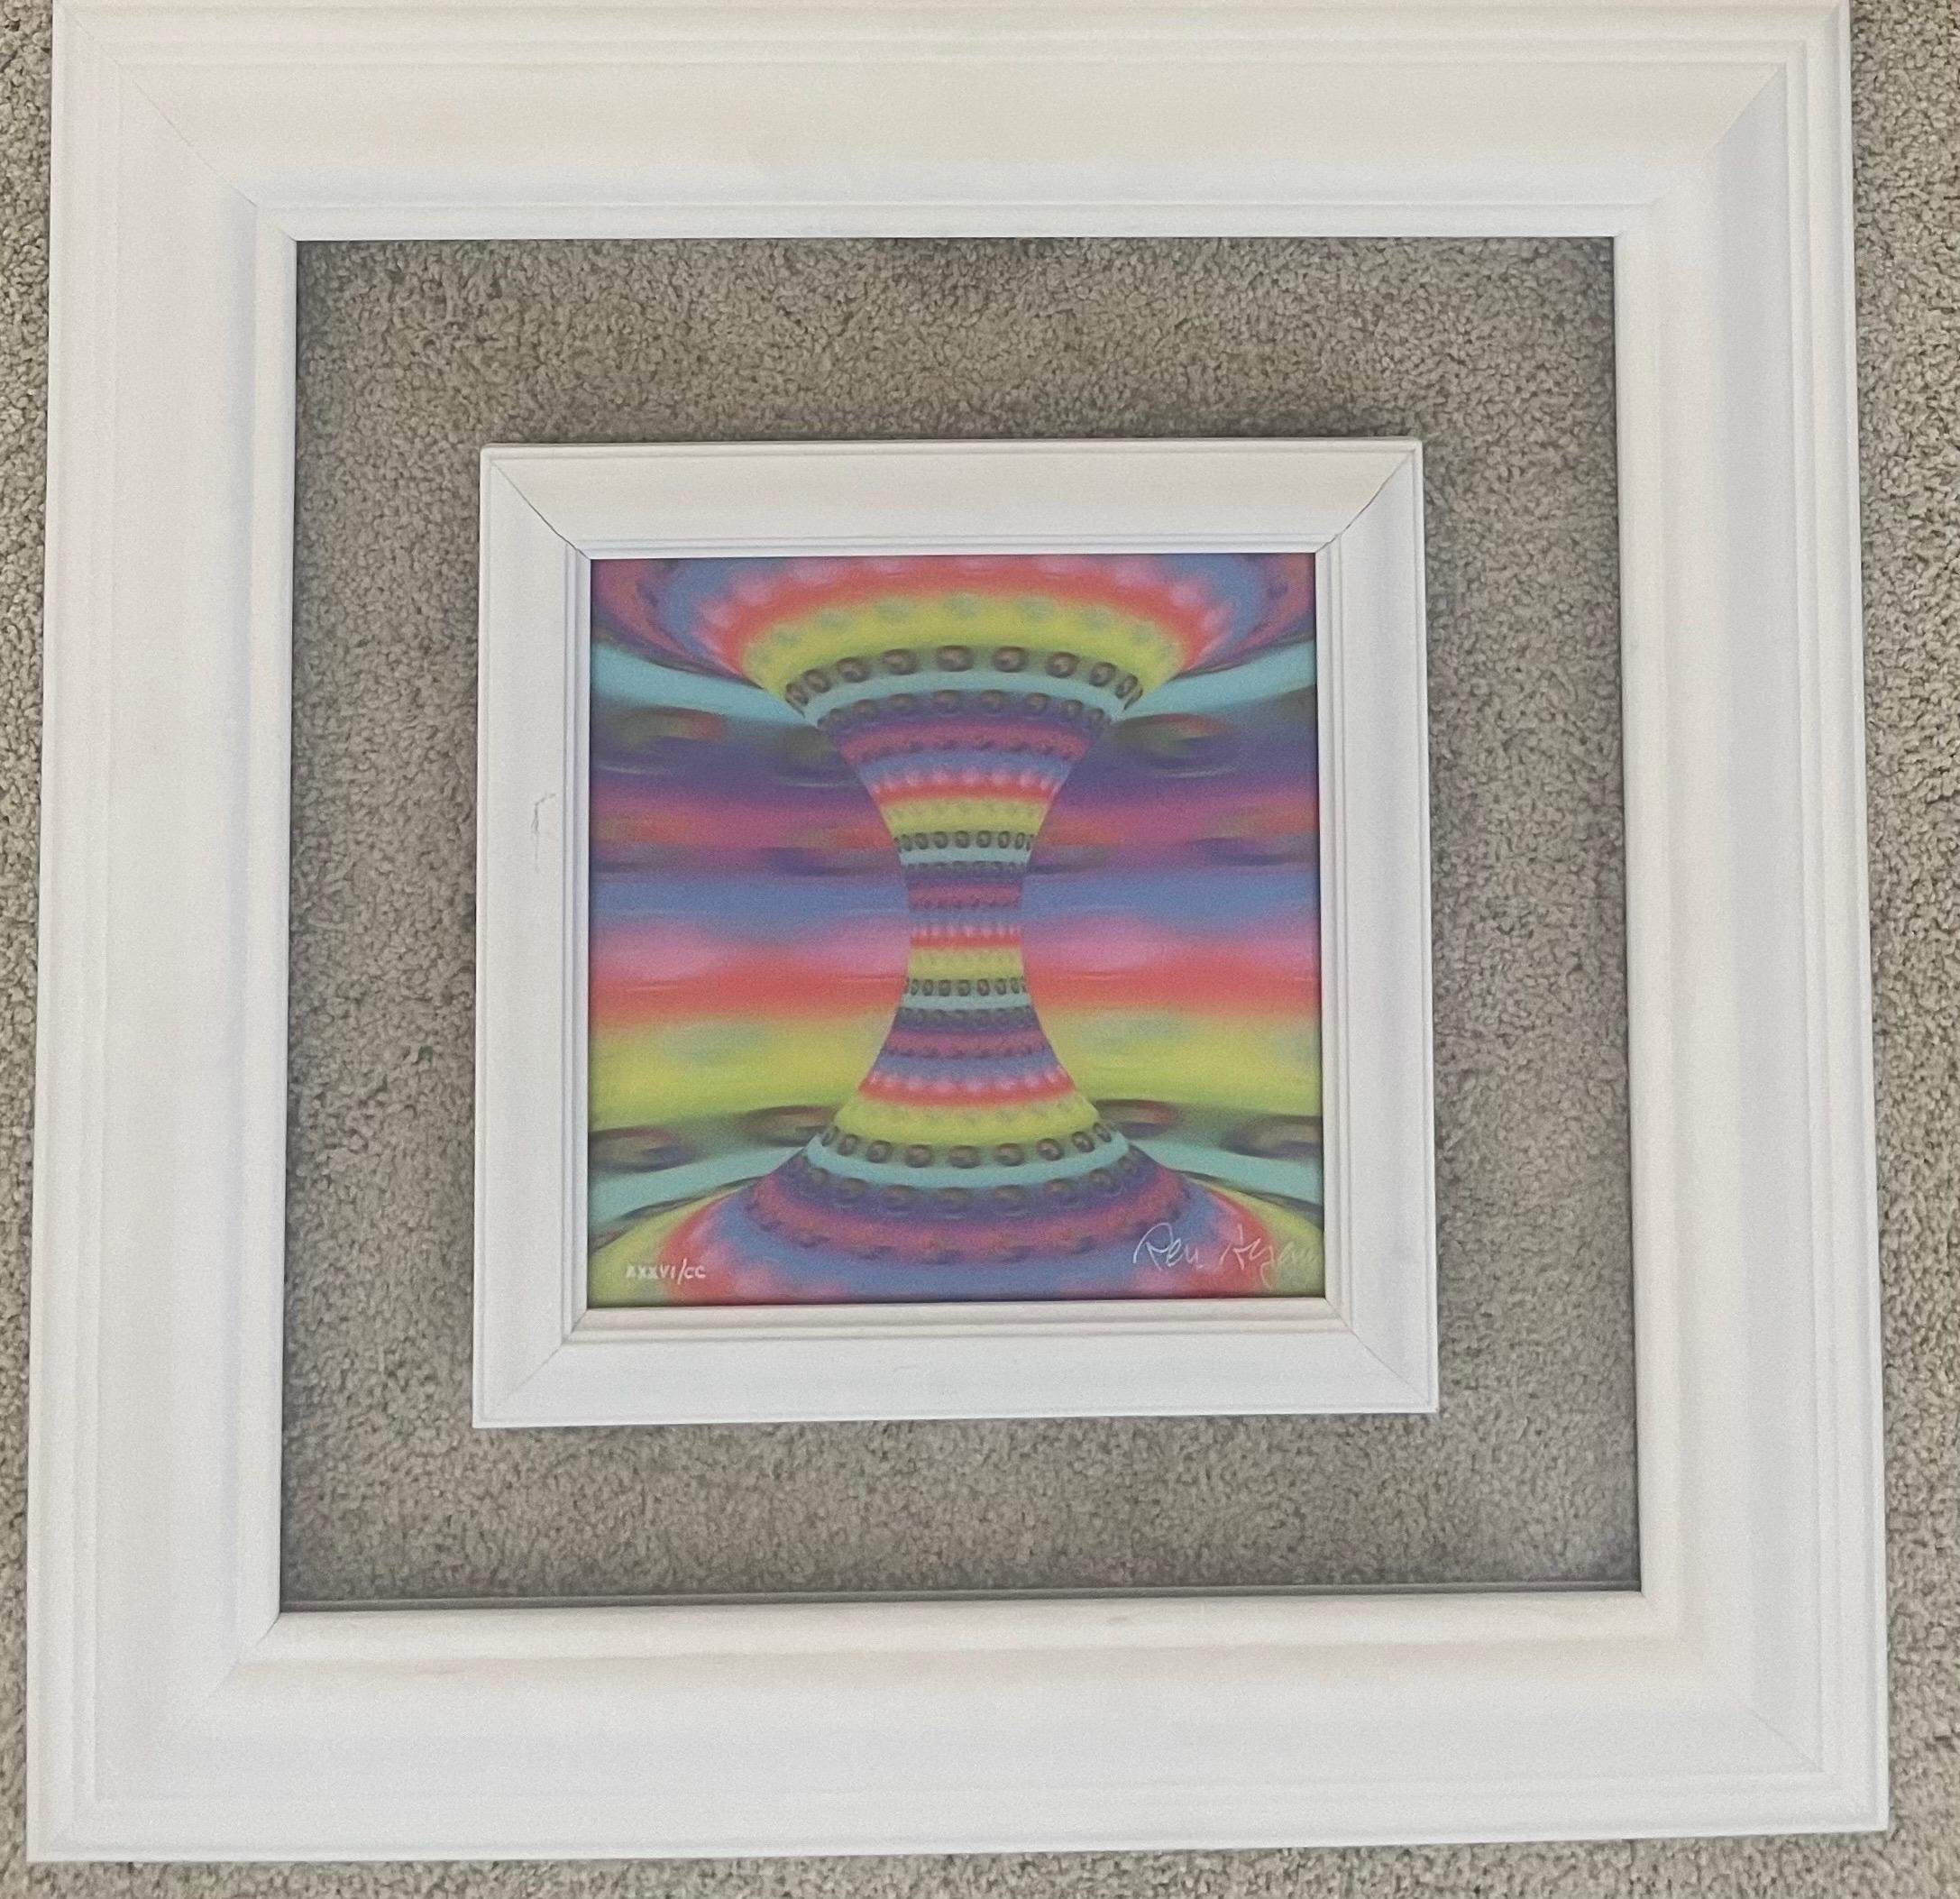 Spectacular holograph and lenticular multiple in the 4th dimension entitled 